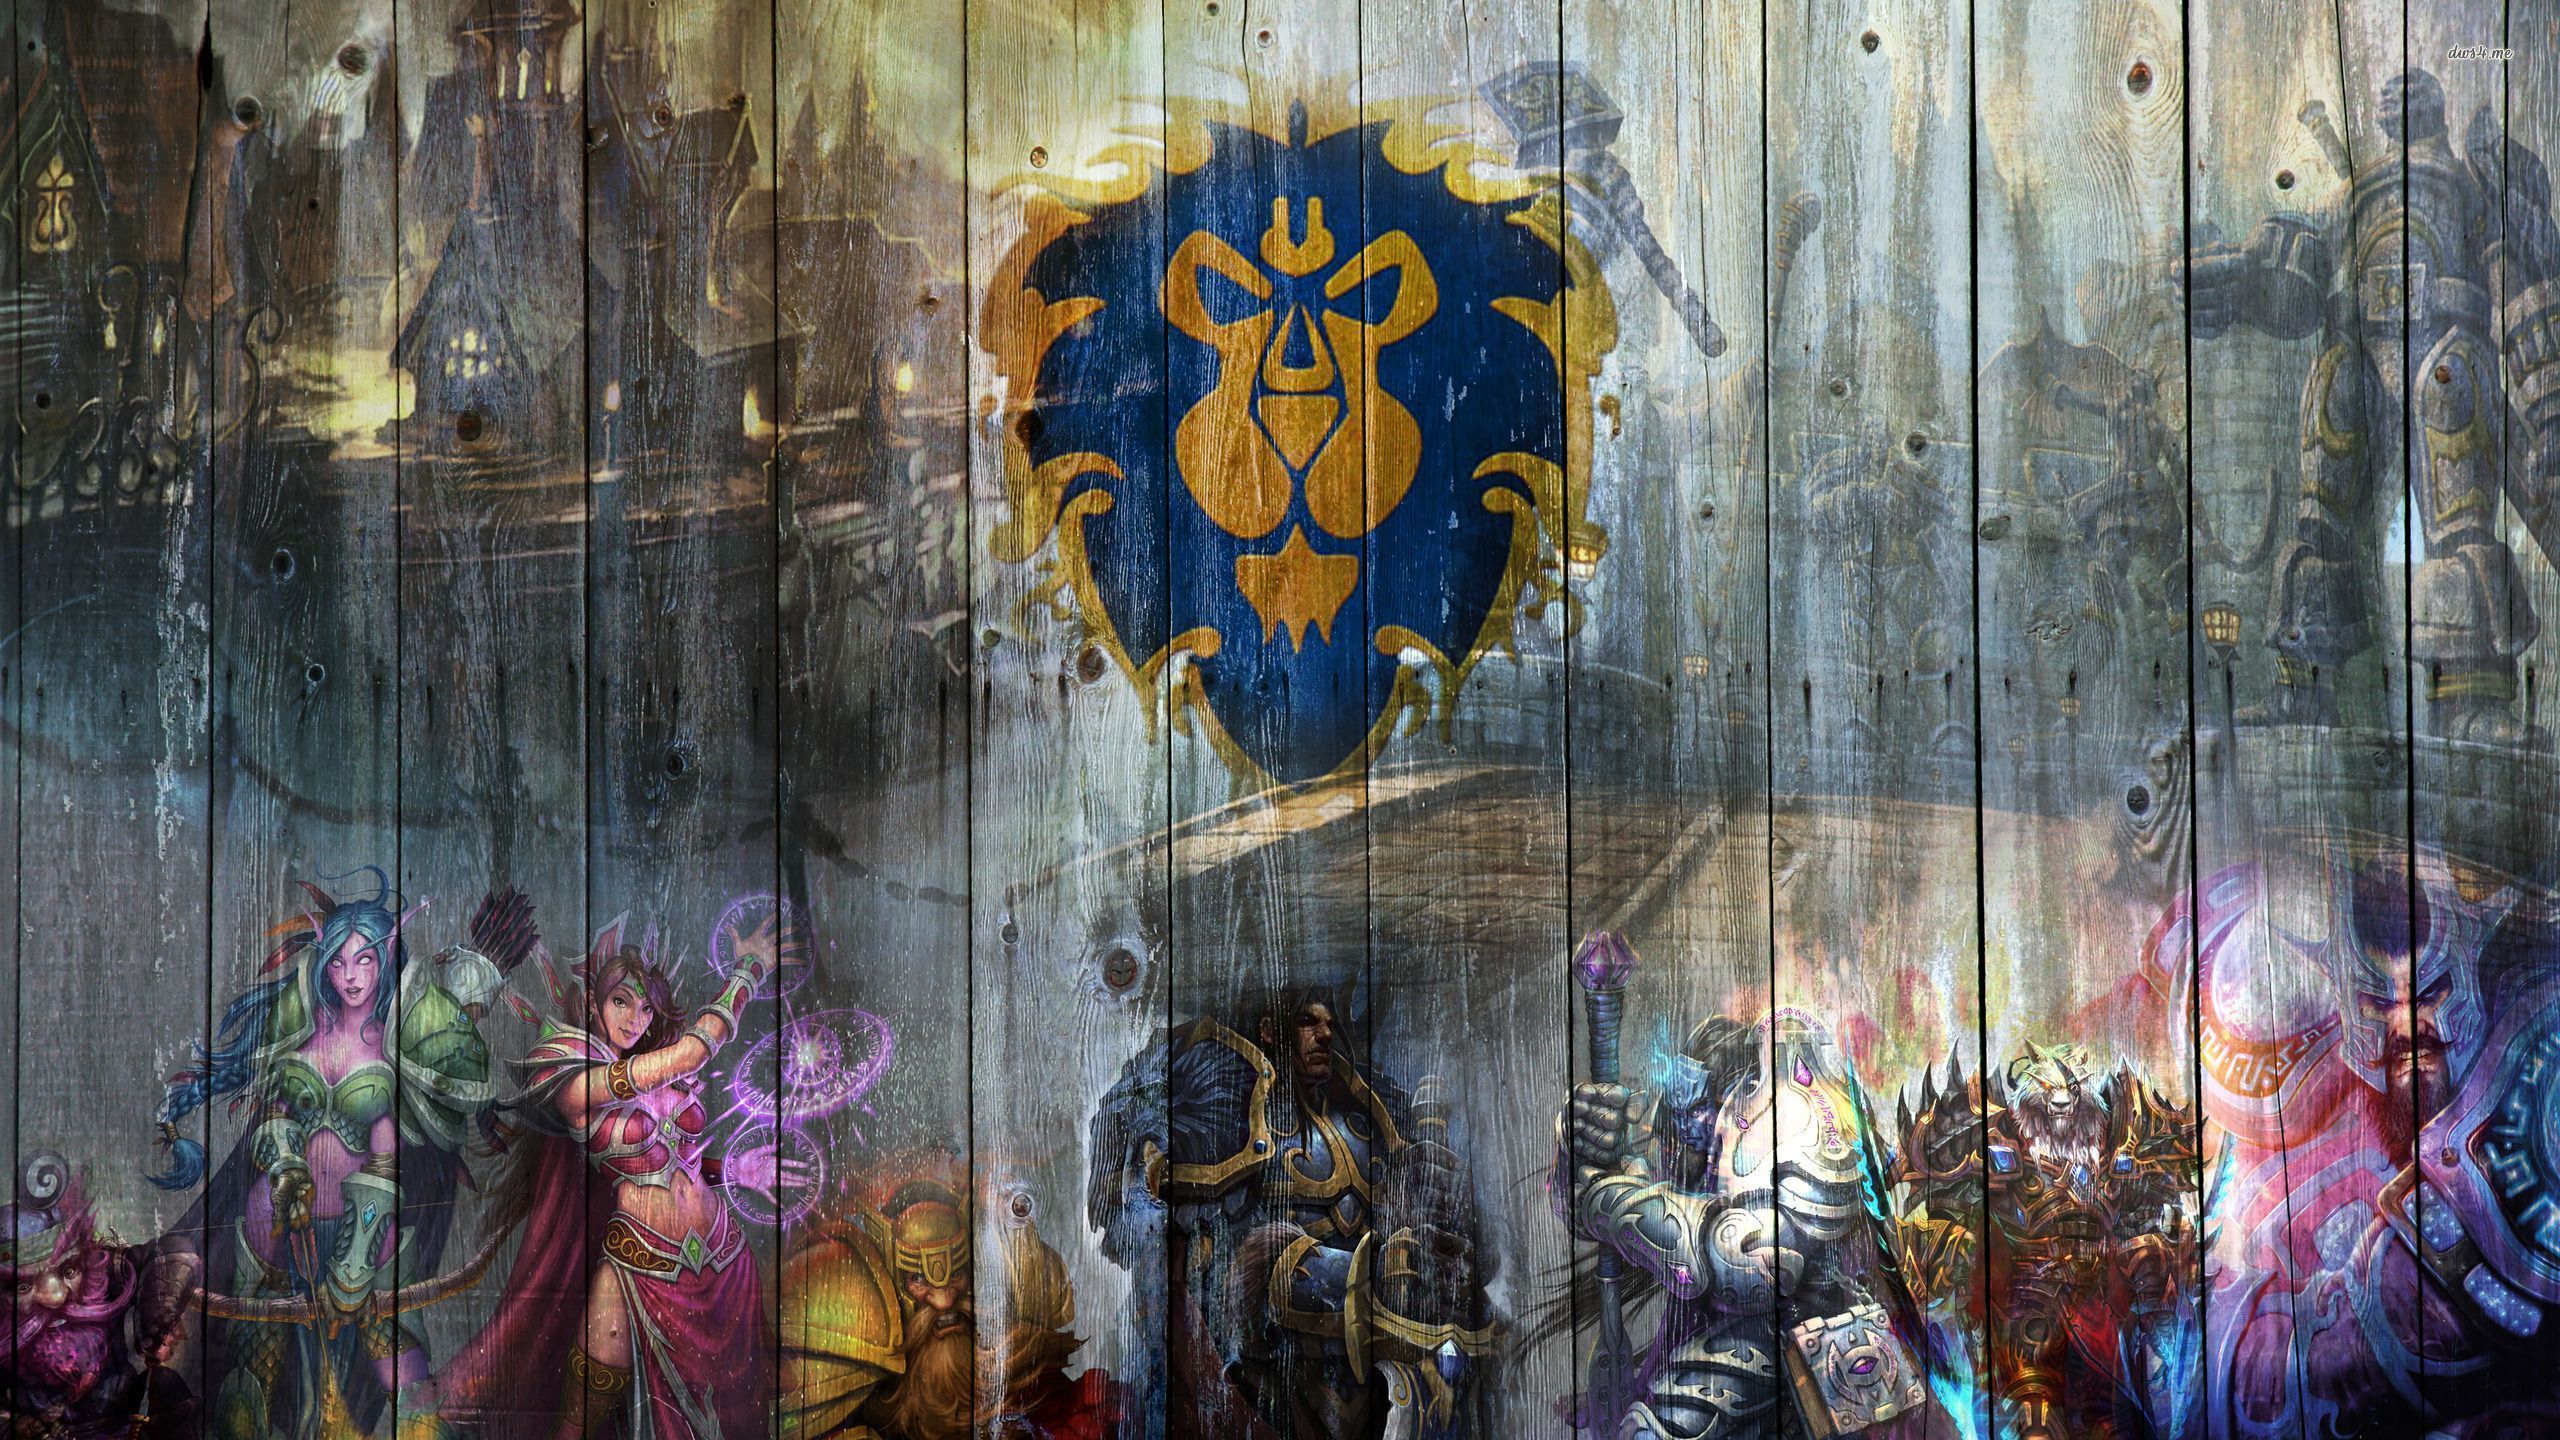 Alliance - World of Warcraft wallpaper - Game wallpapers - #9286